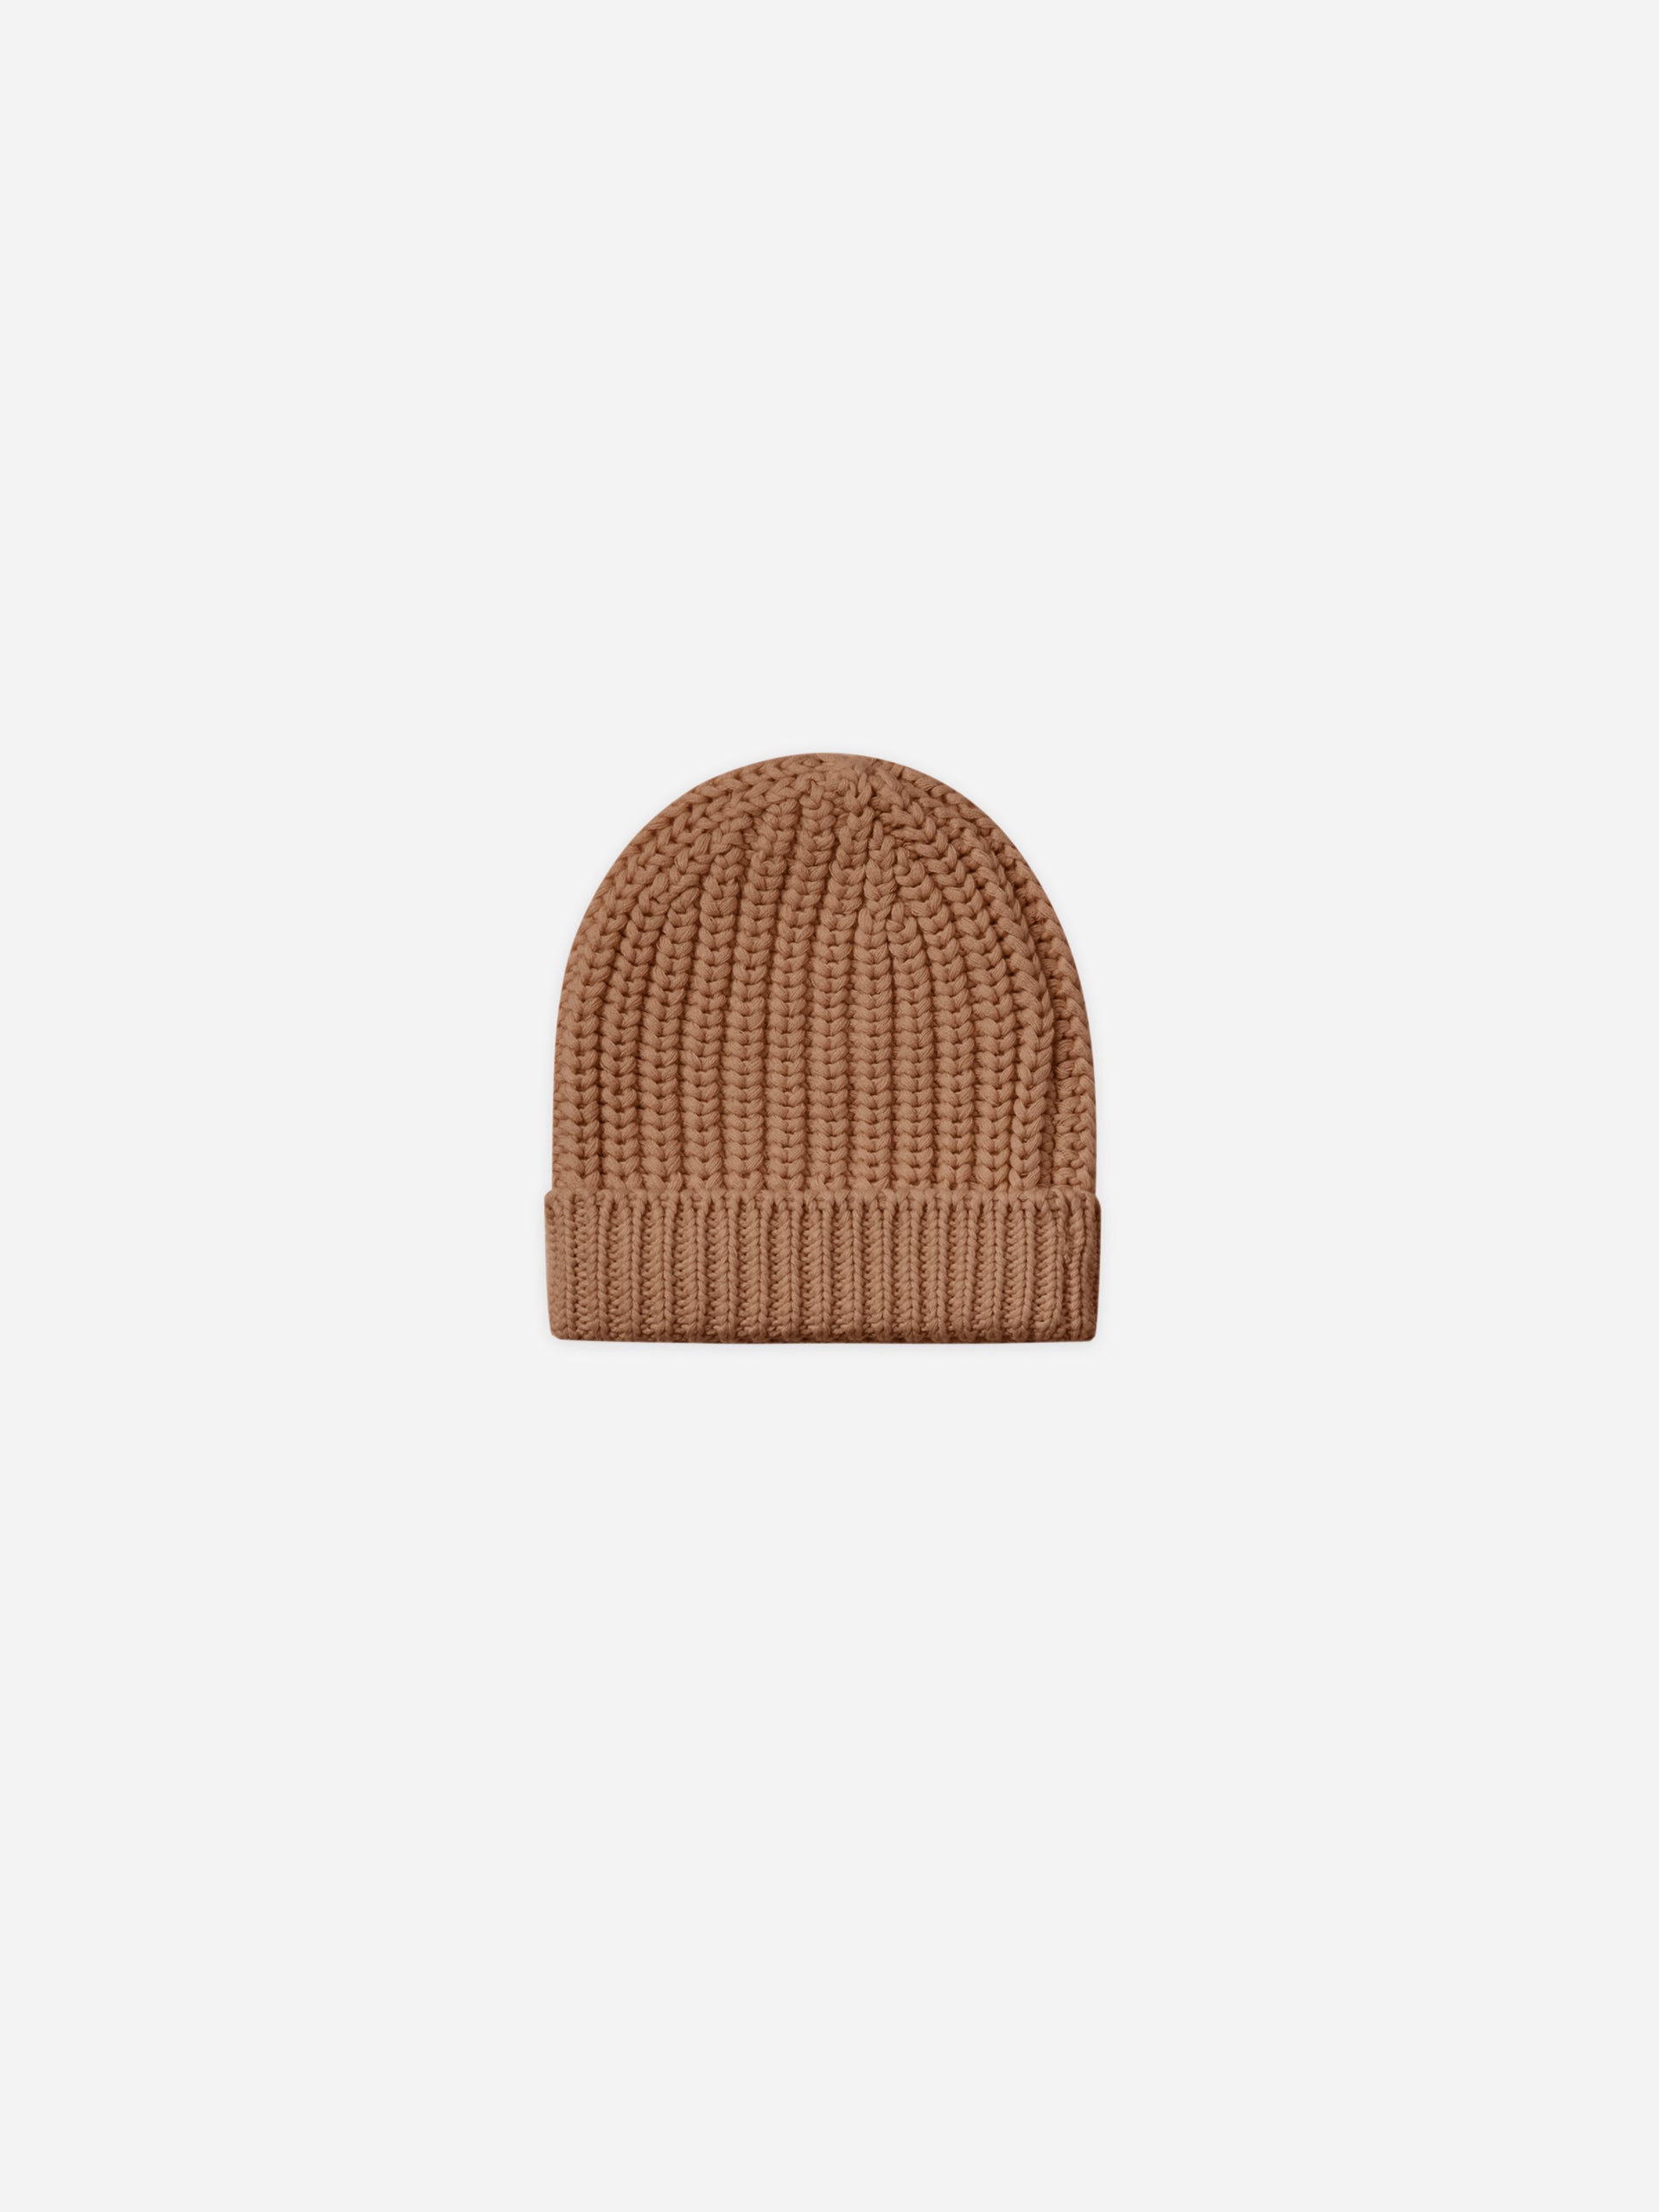 Beanie || Cinnamon - Rylee + Cru | Kids Clothes | Trendy Baby Clothes | Modern Infant Outfits |